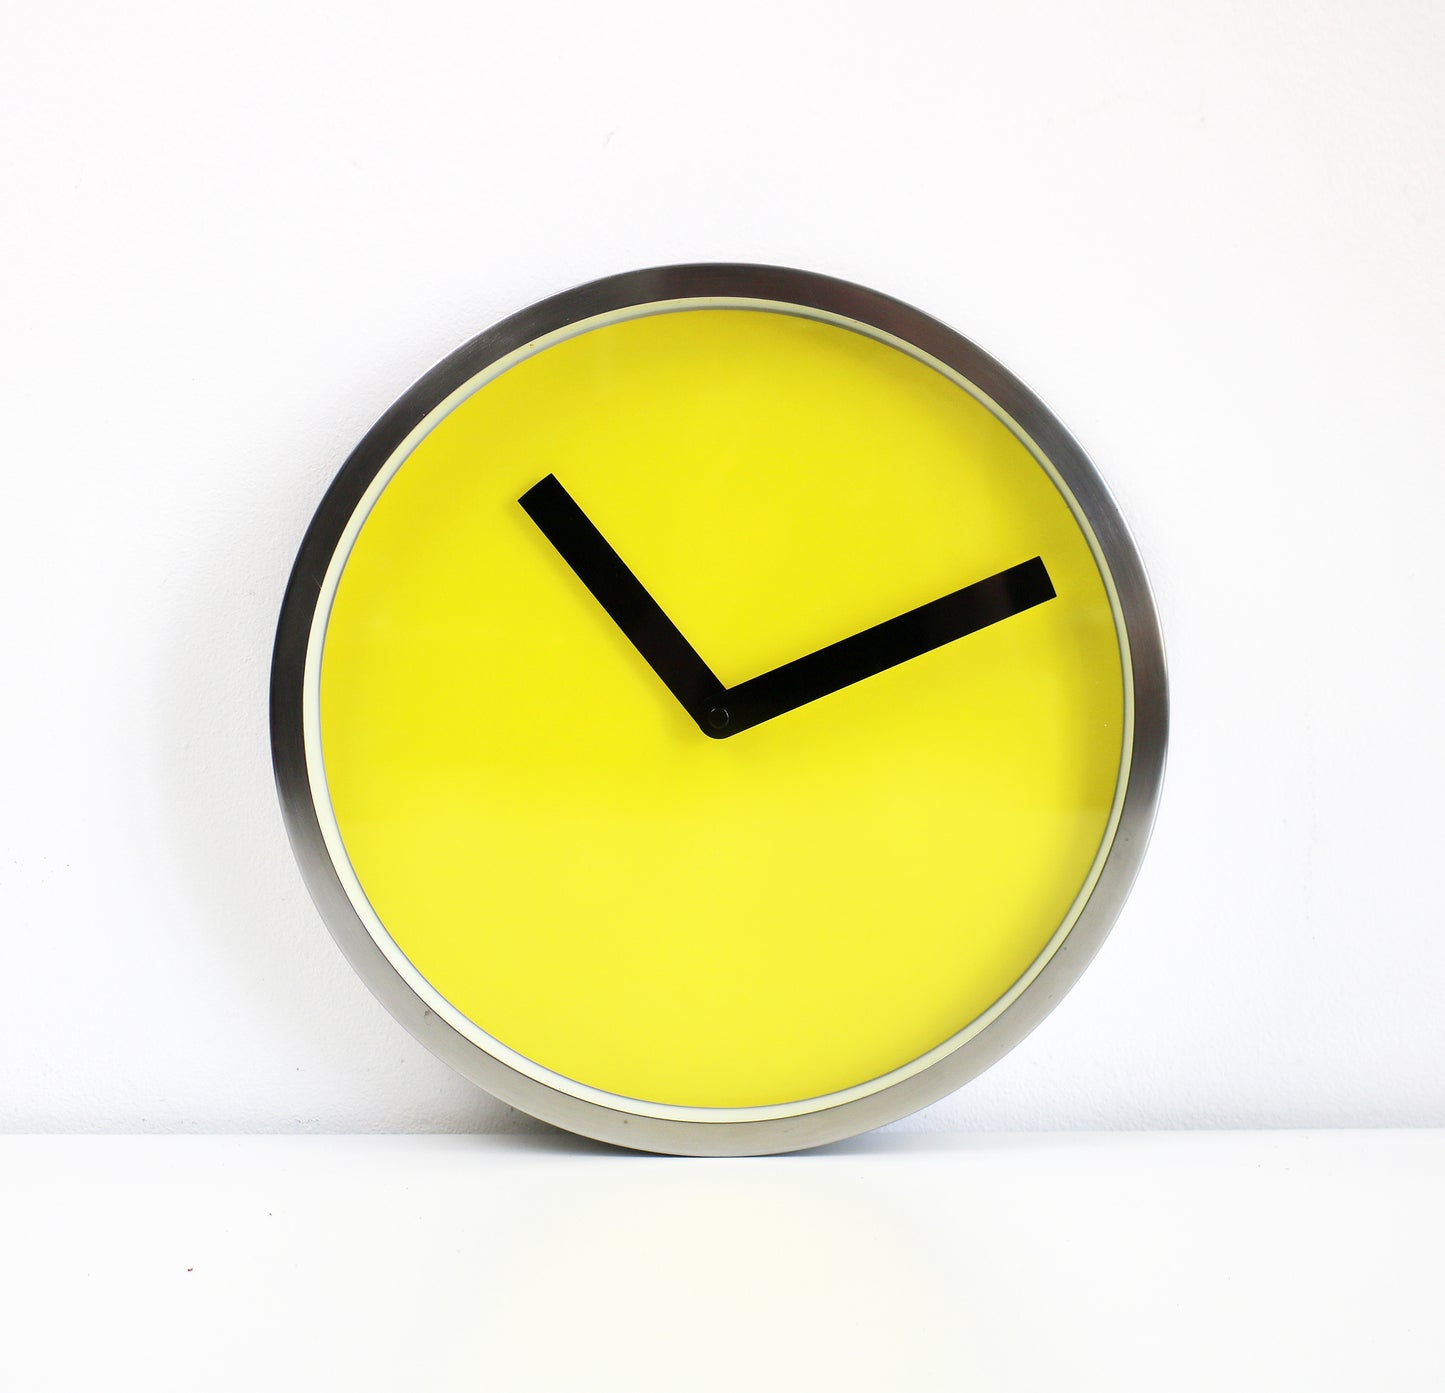 Preloved minimalist wall clock by IKEA space age yellow, black and steel